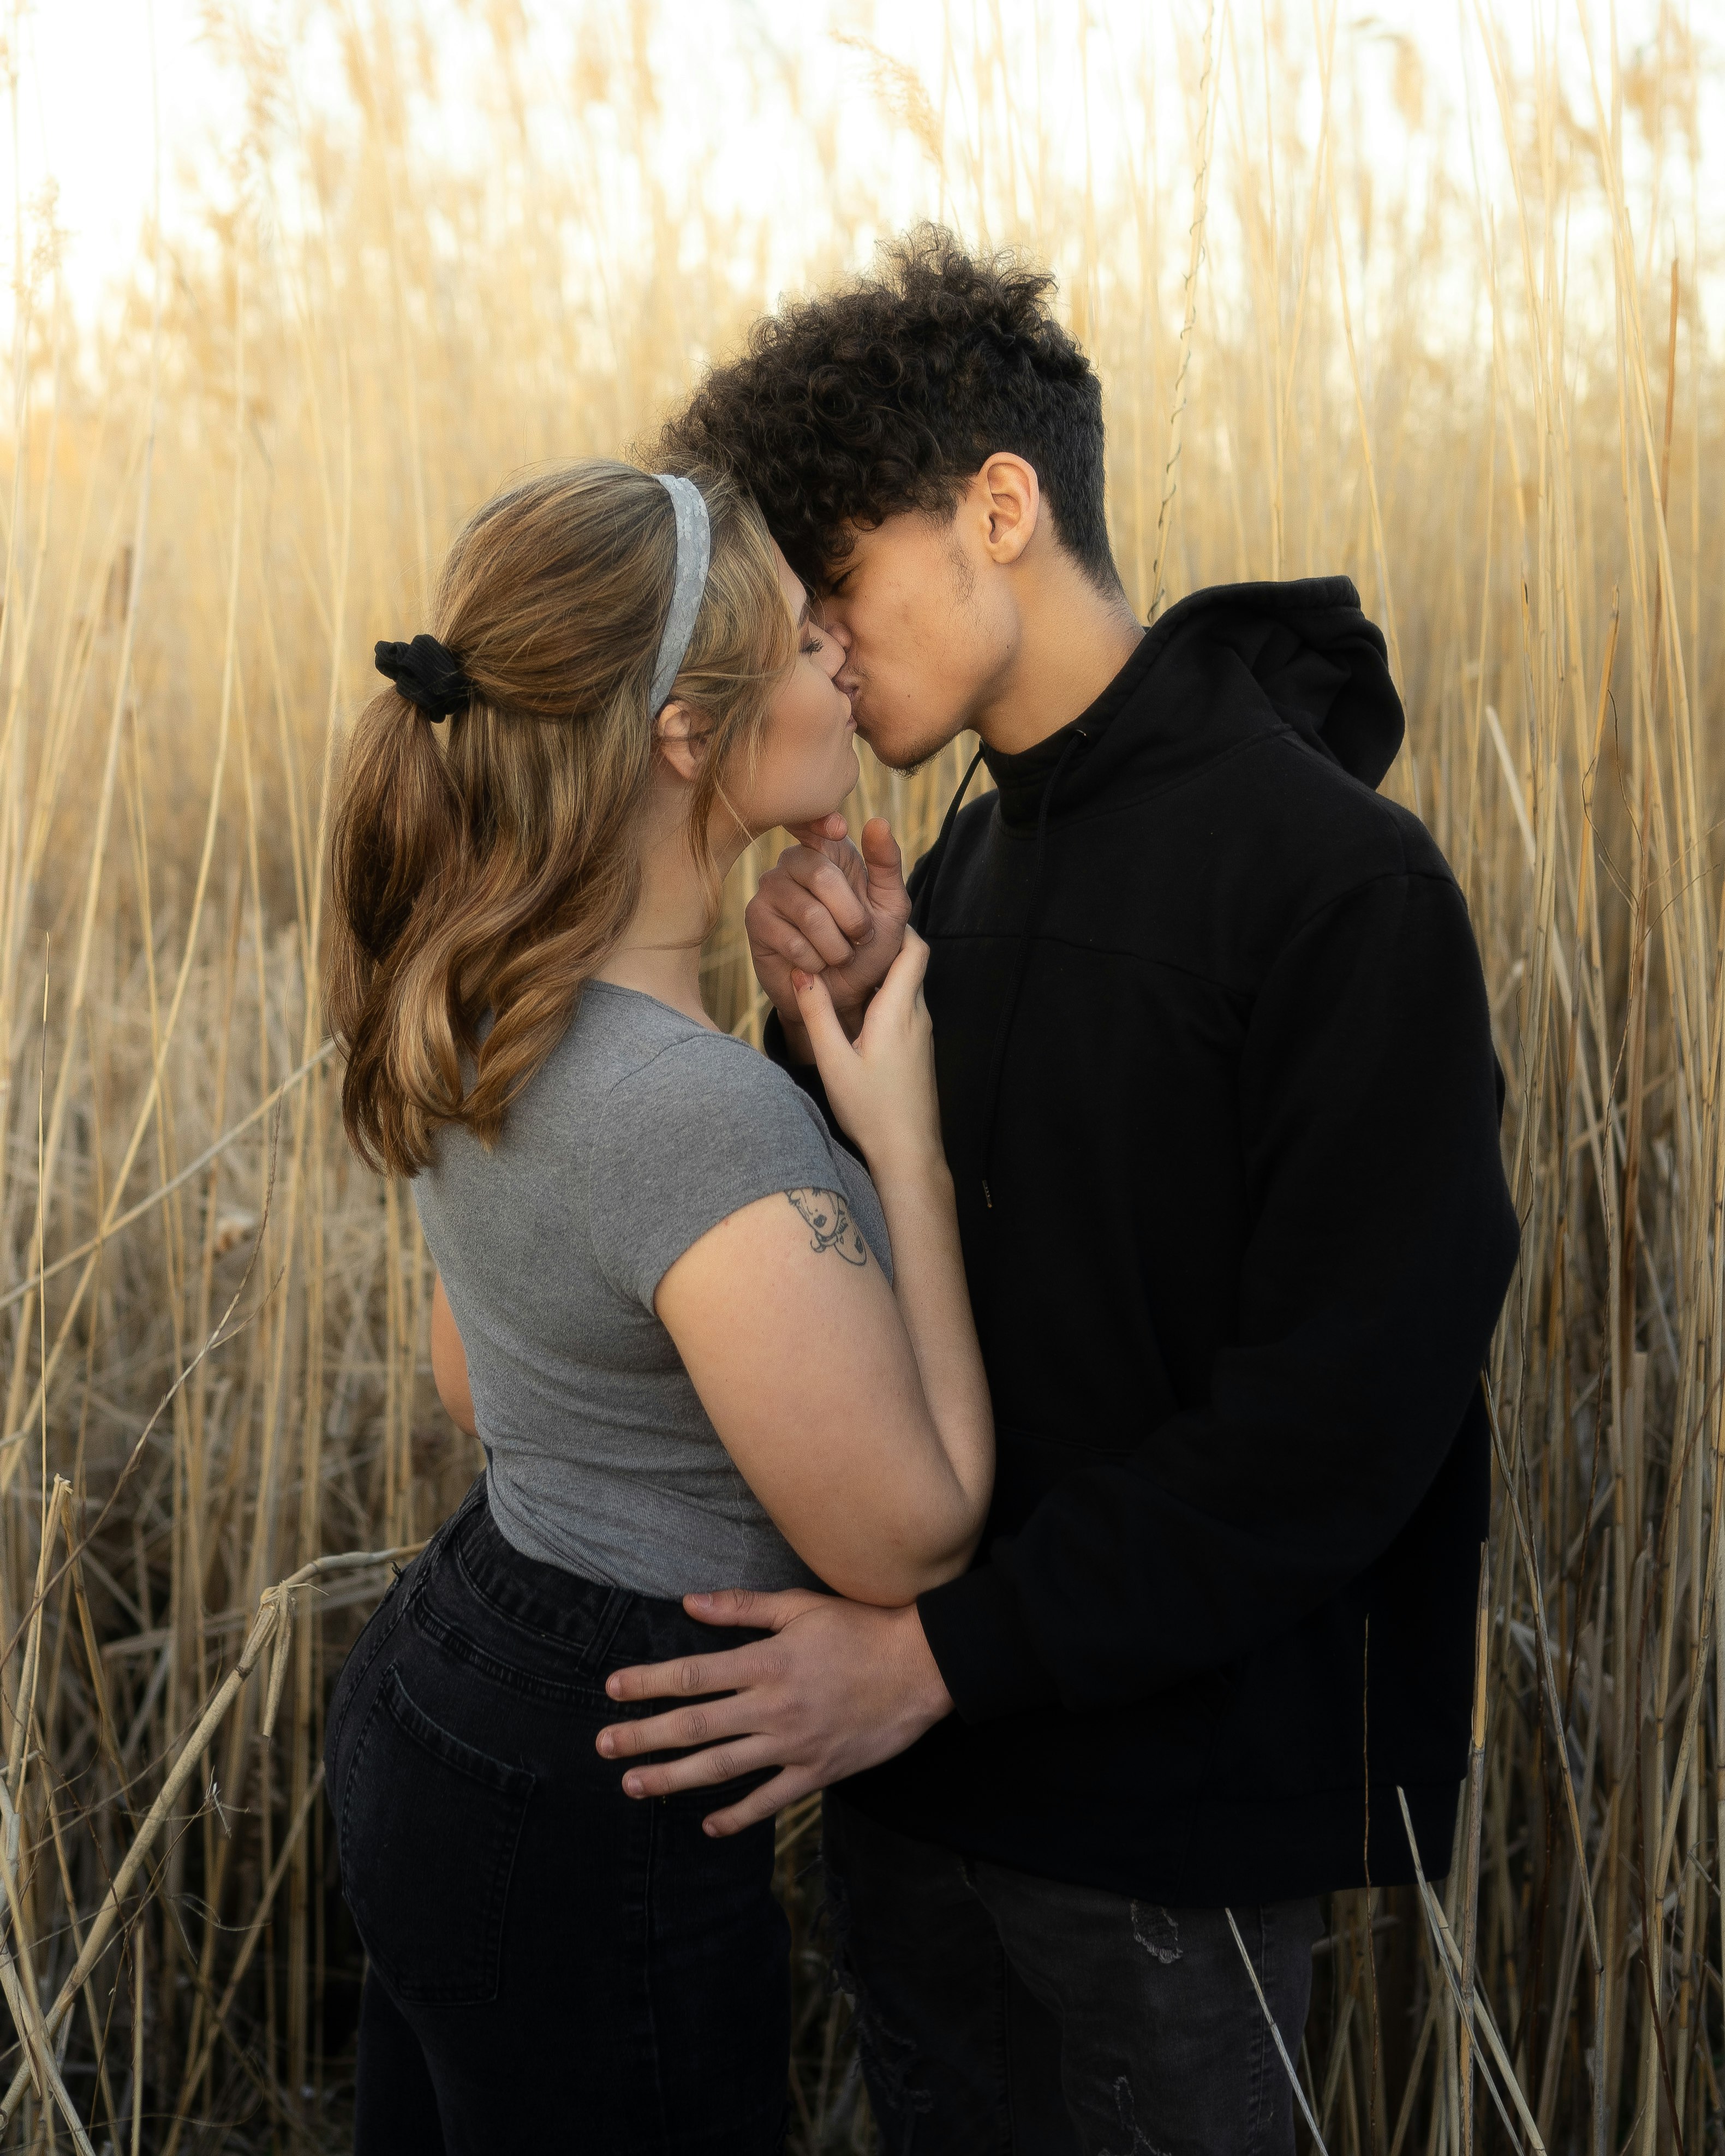 man and woman kissing on brown grass field during daytime